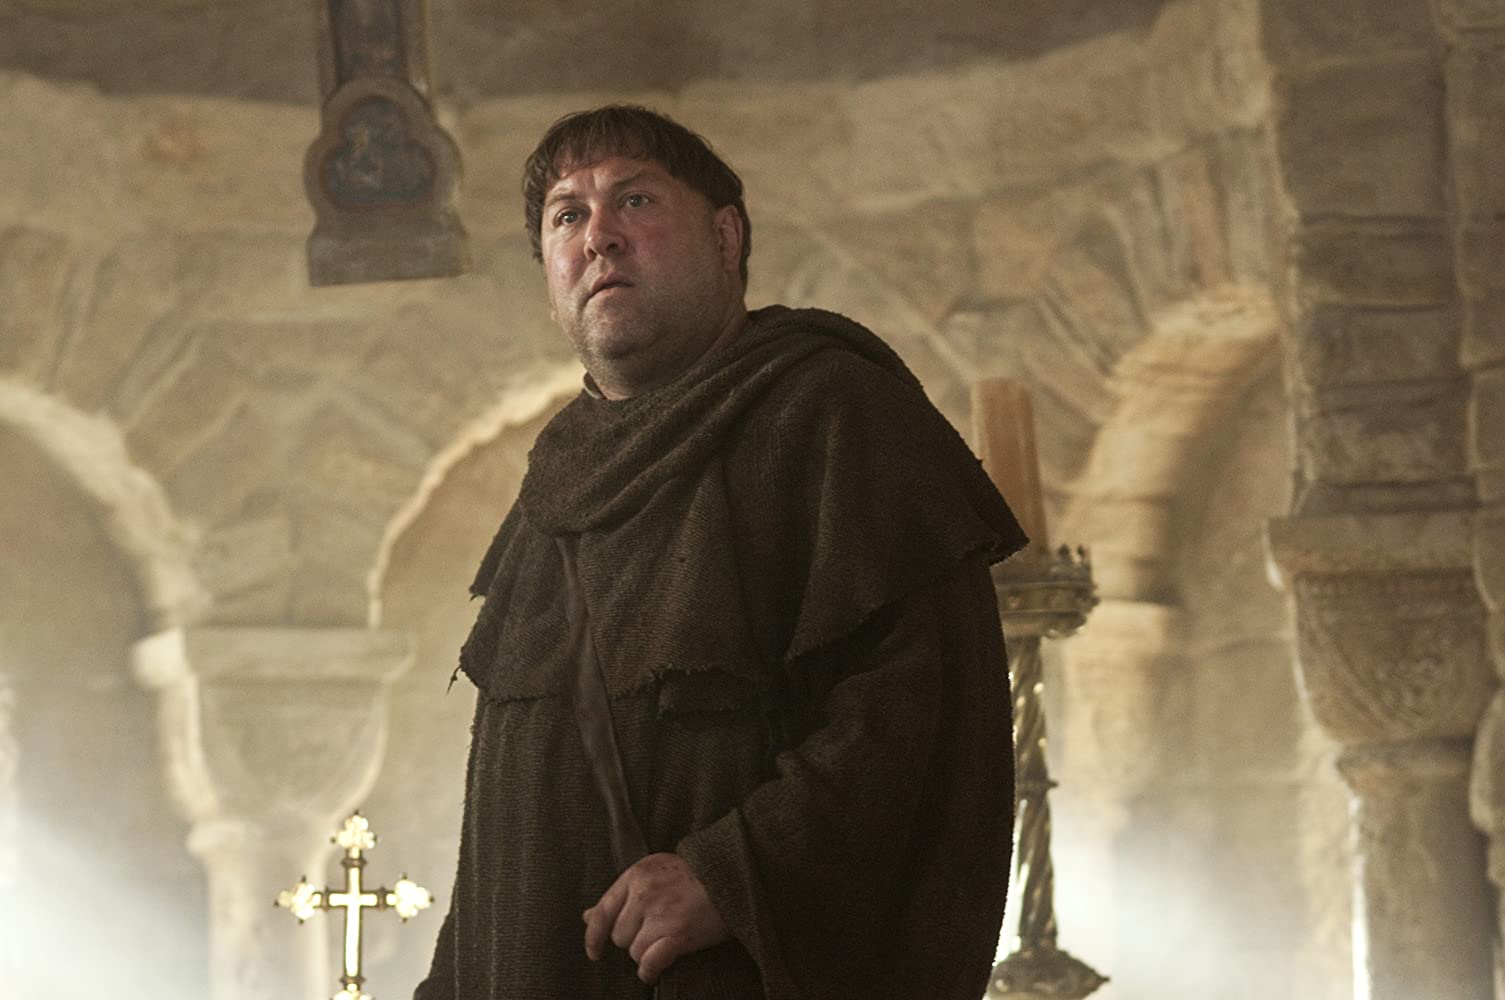 What is the name of this character in Game of Thrones?